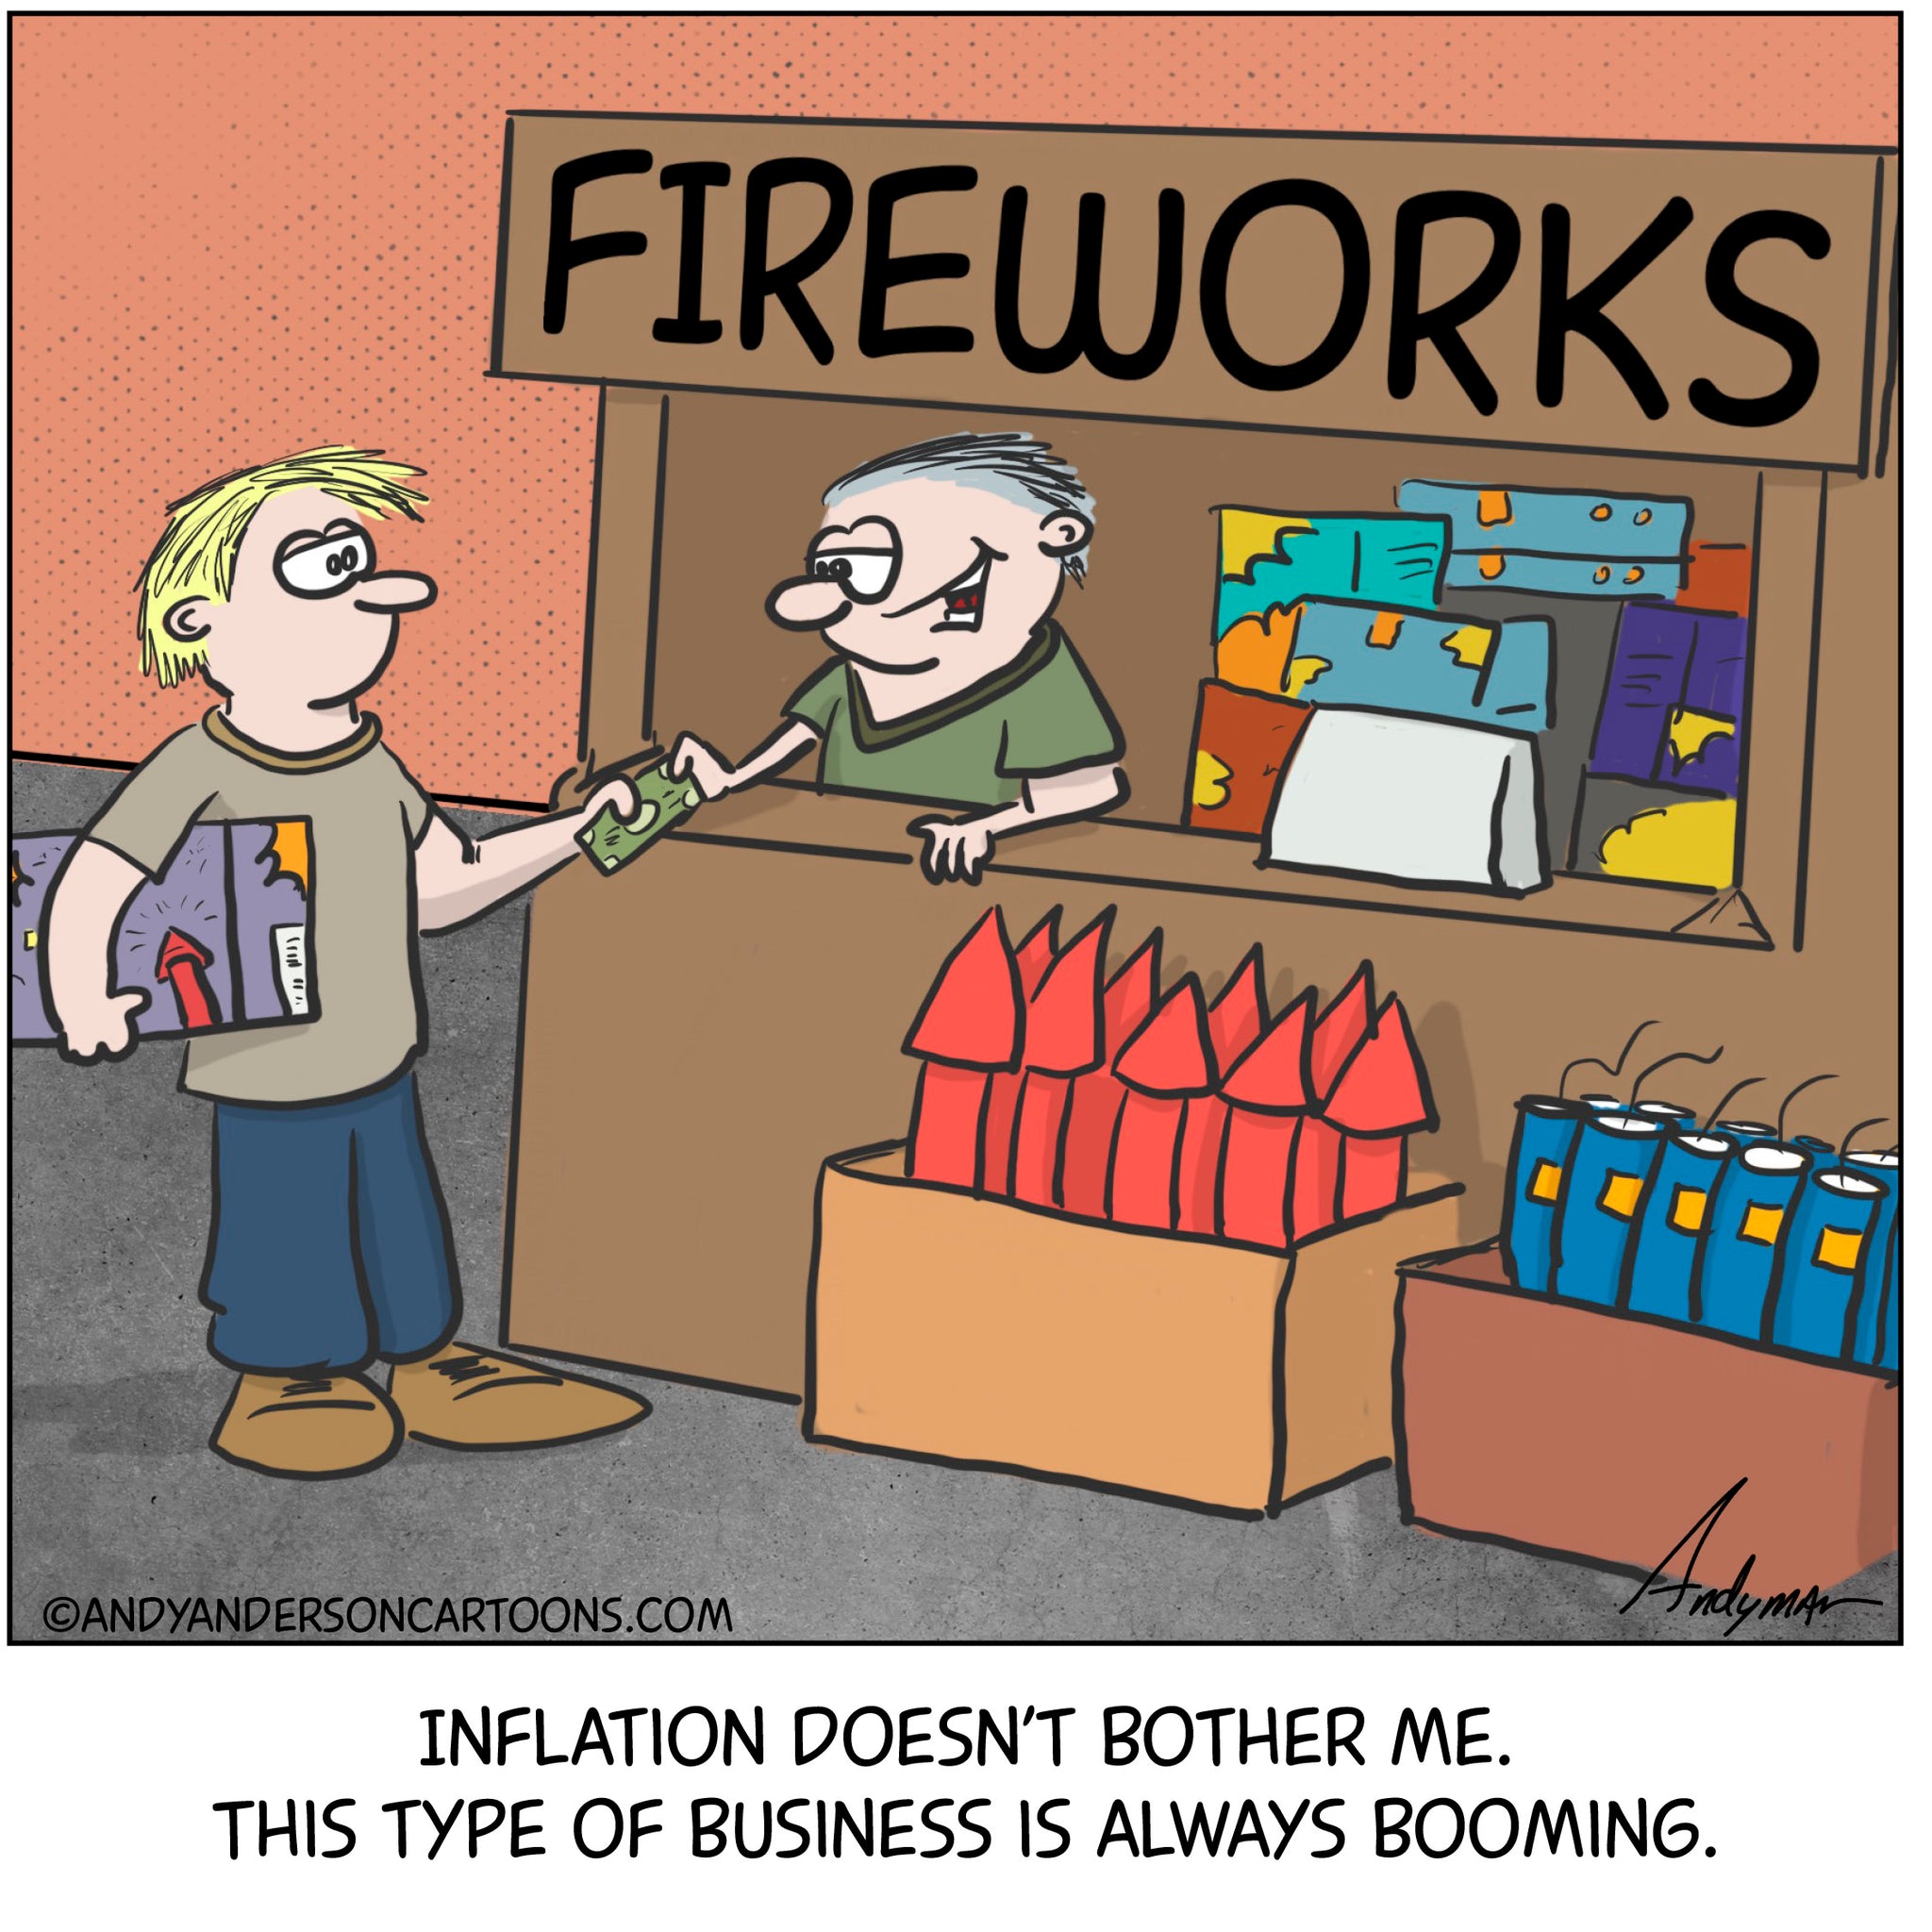 Inflation and fireworks cartoon